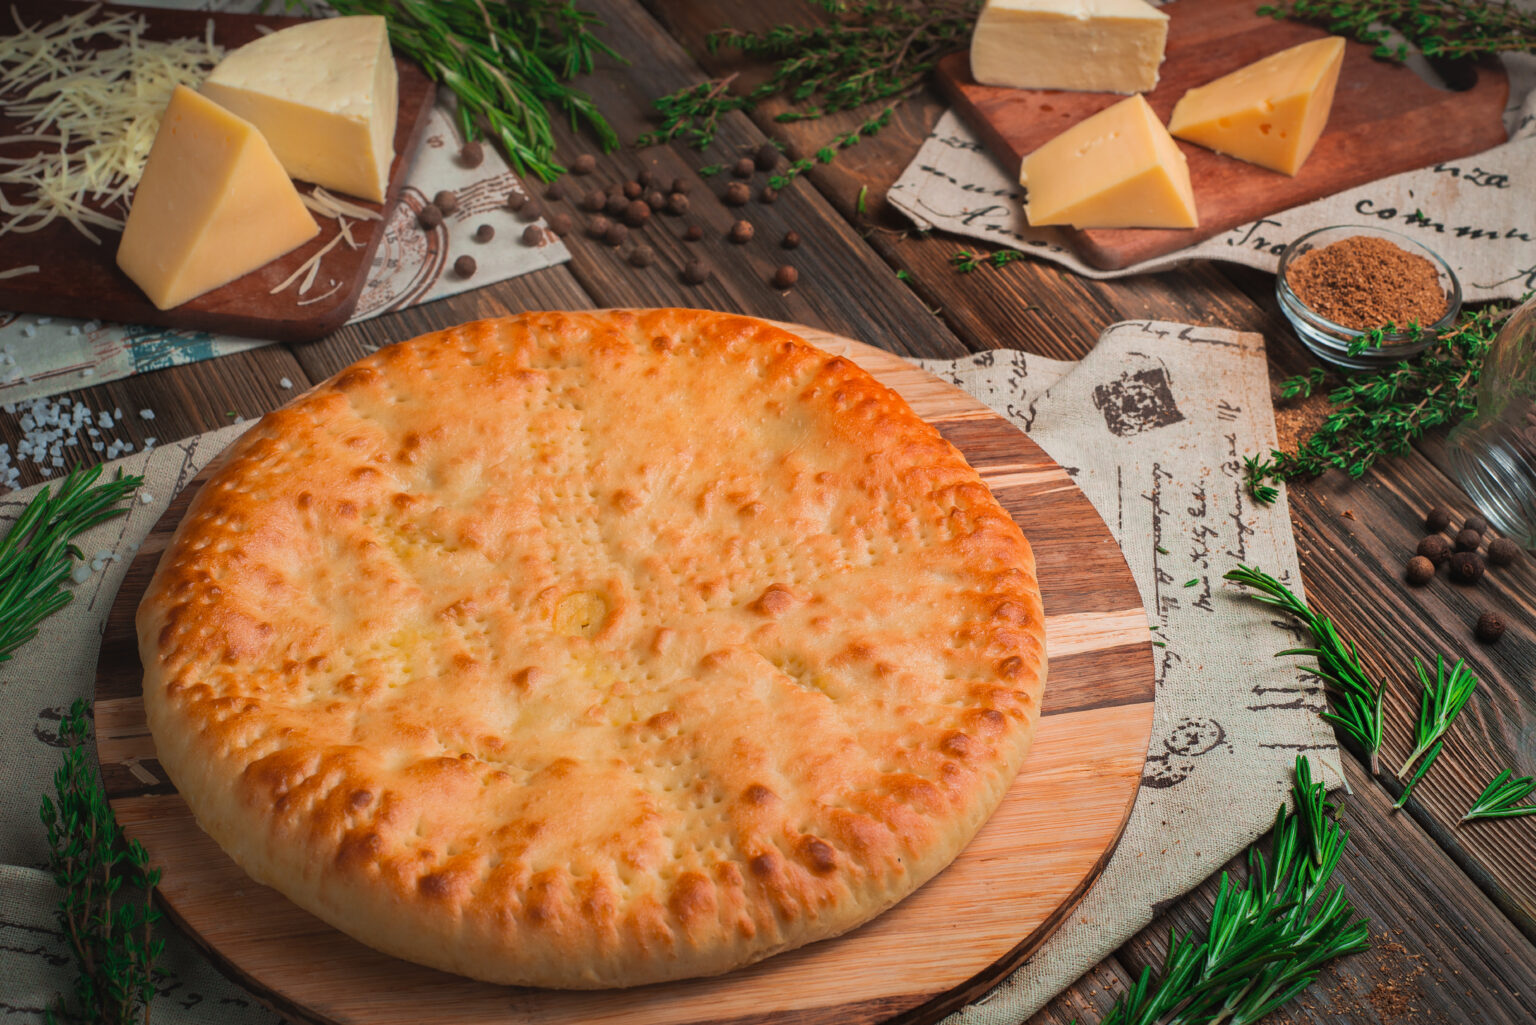 Homemade savory pie filled with cheese on a wooden kitchen table with ingredients. Traditional baking concept. Delivery menu with copy space